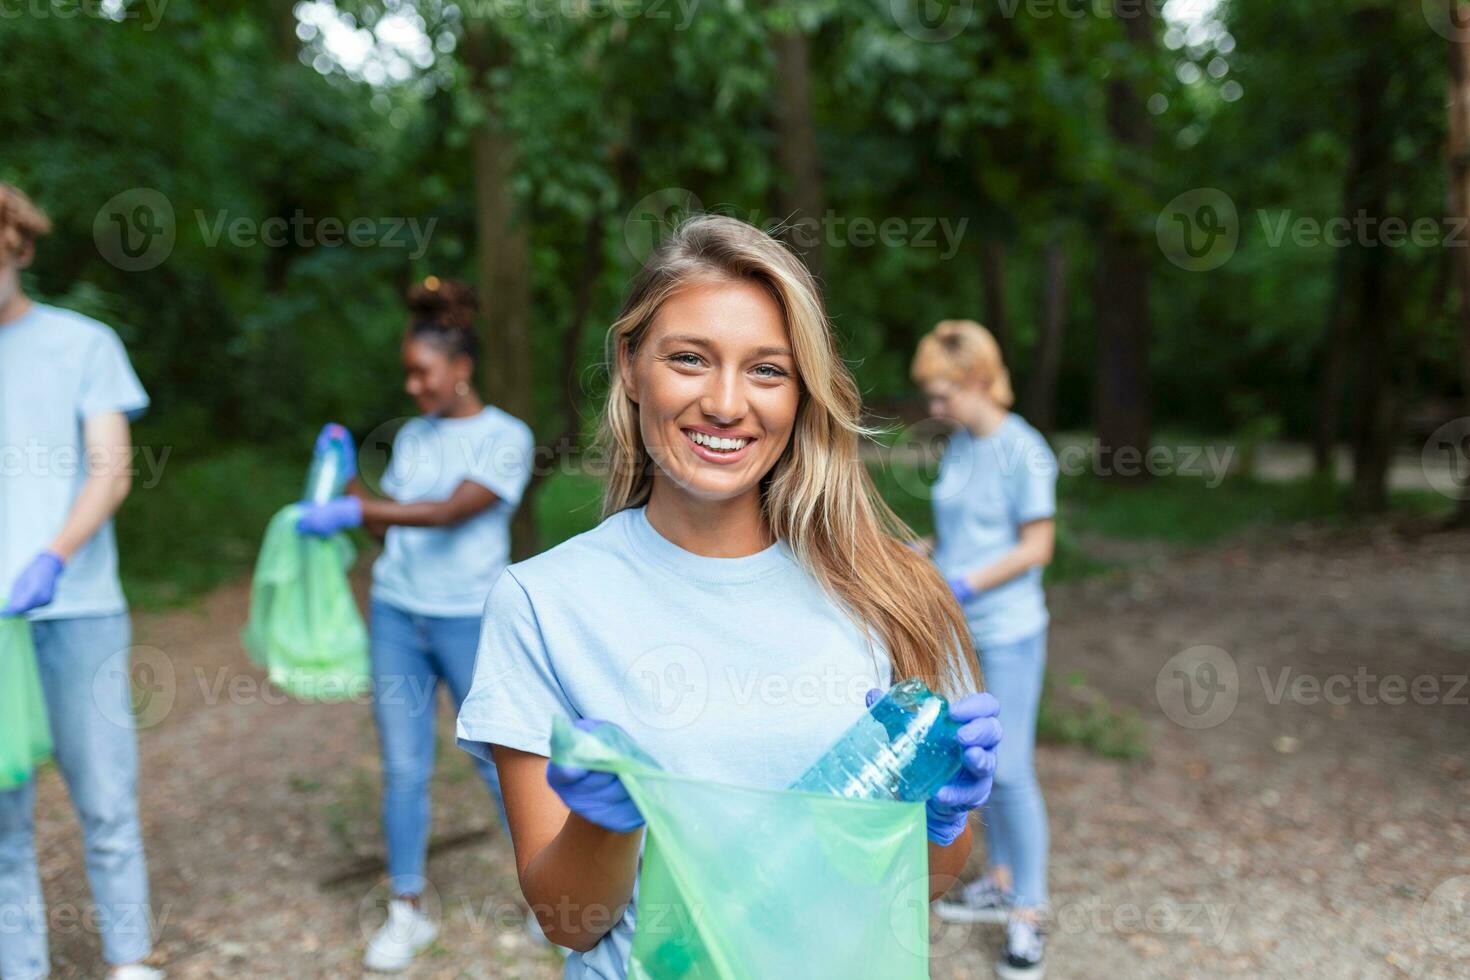 The young adult woman, who is one of a diverse group of volunteers, takes time to smile for the camera. Hold garbage bag and looking at camera photo